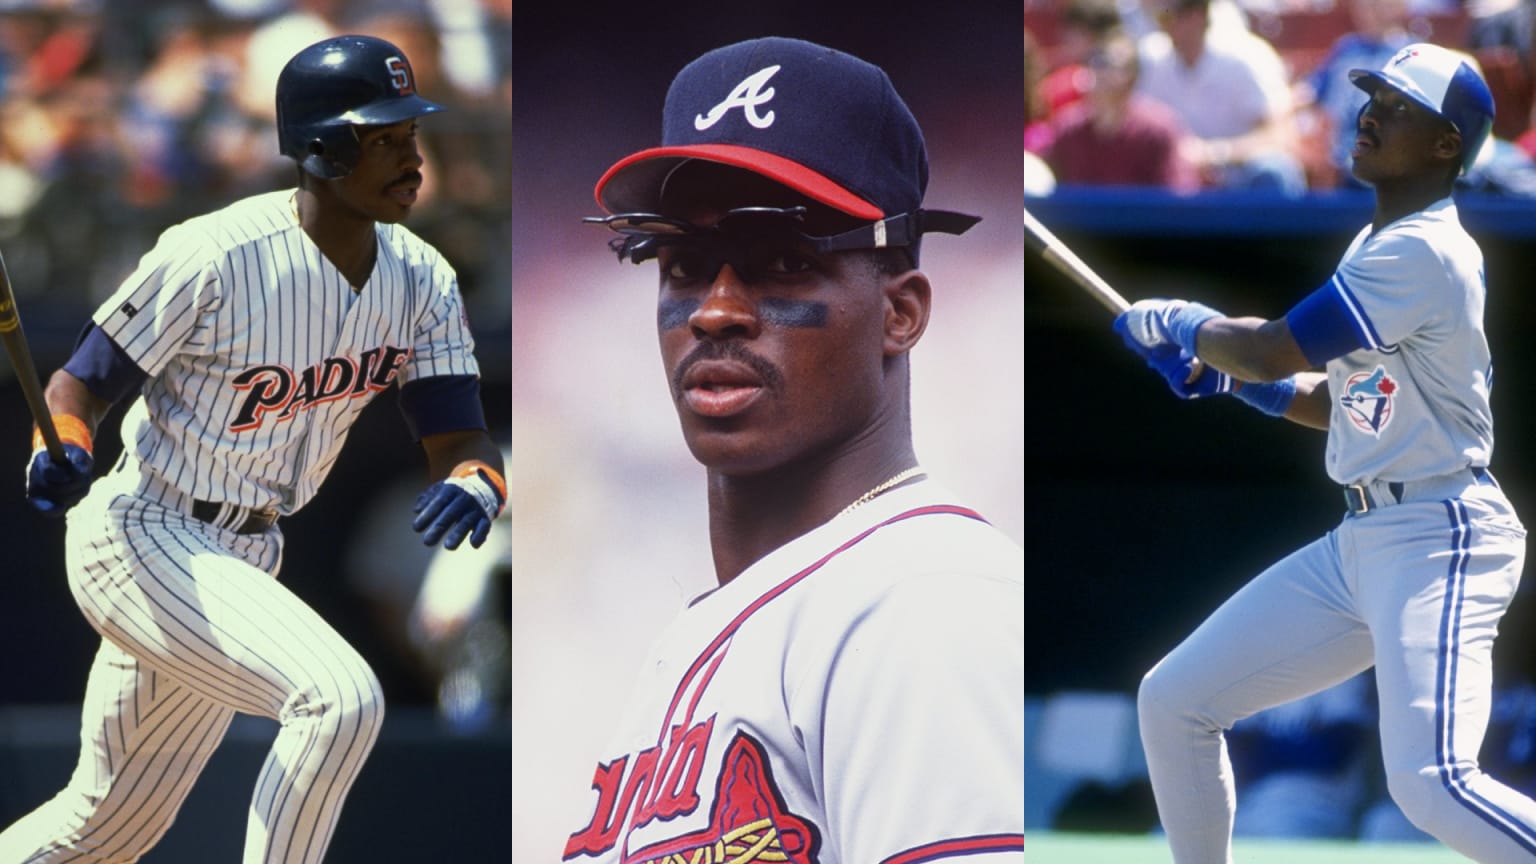 Three images of Fred McGriff with the Padres, Braves and Blue Jays